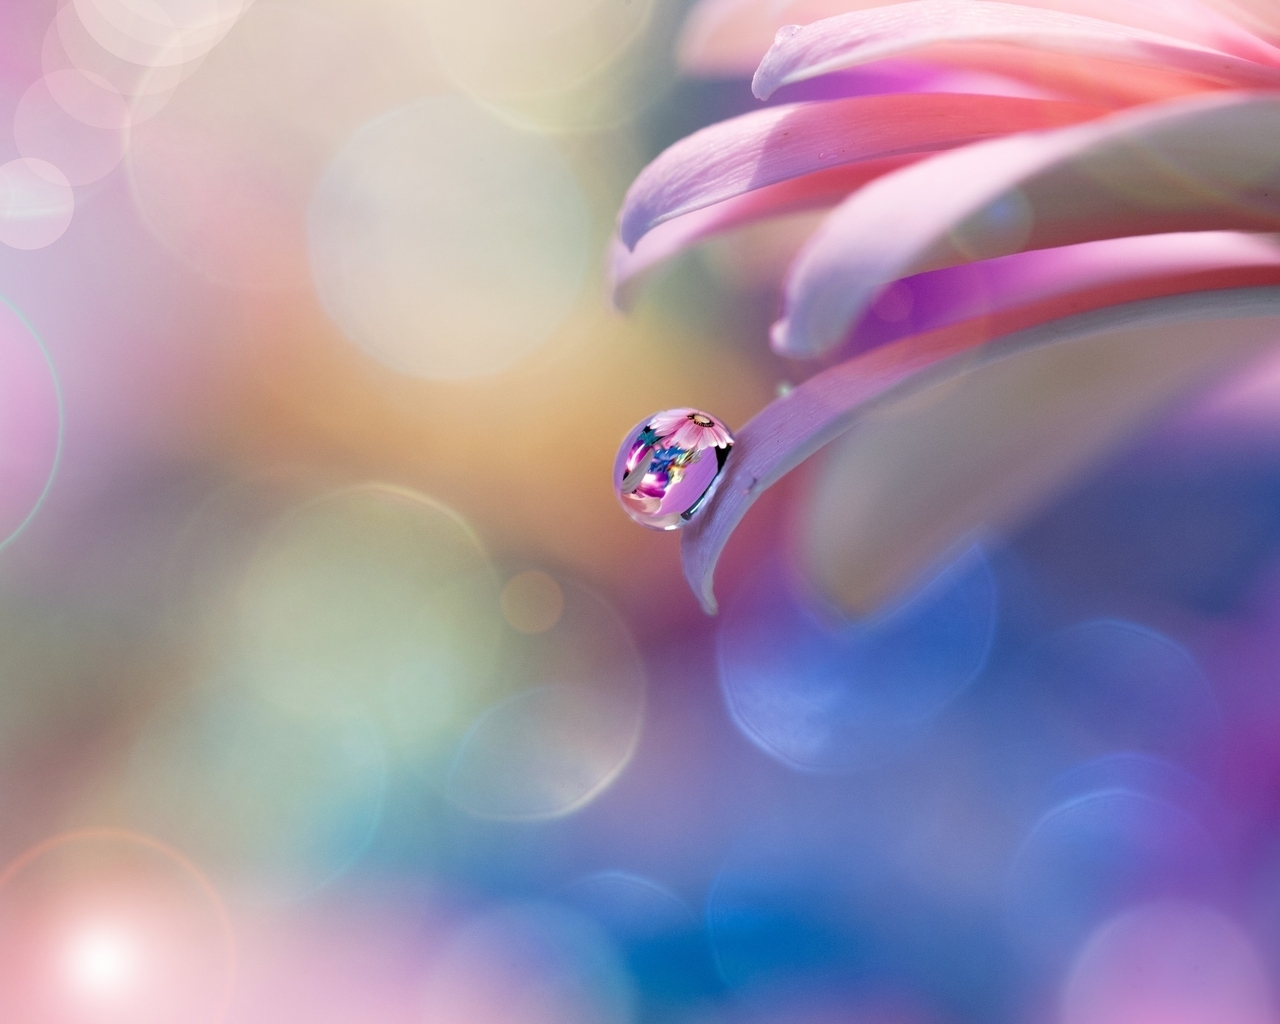 Image: Drop, water, reflection, dew, flower, glare, color